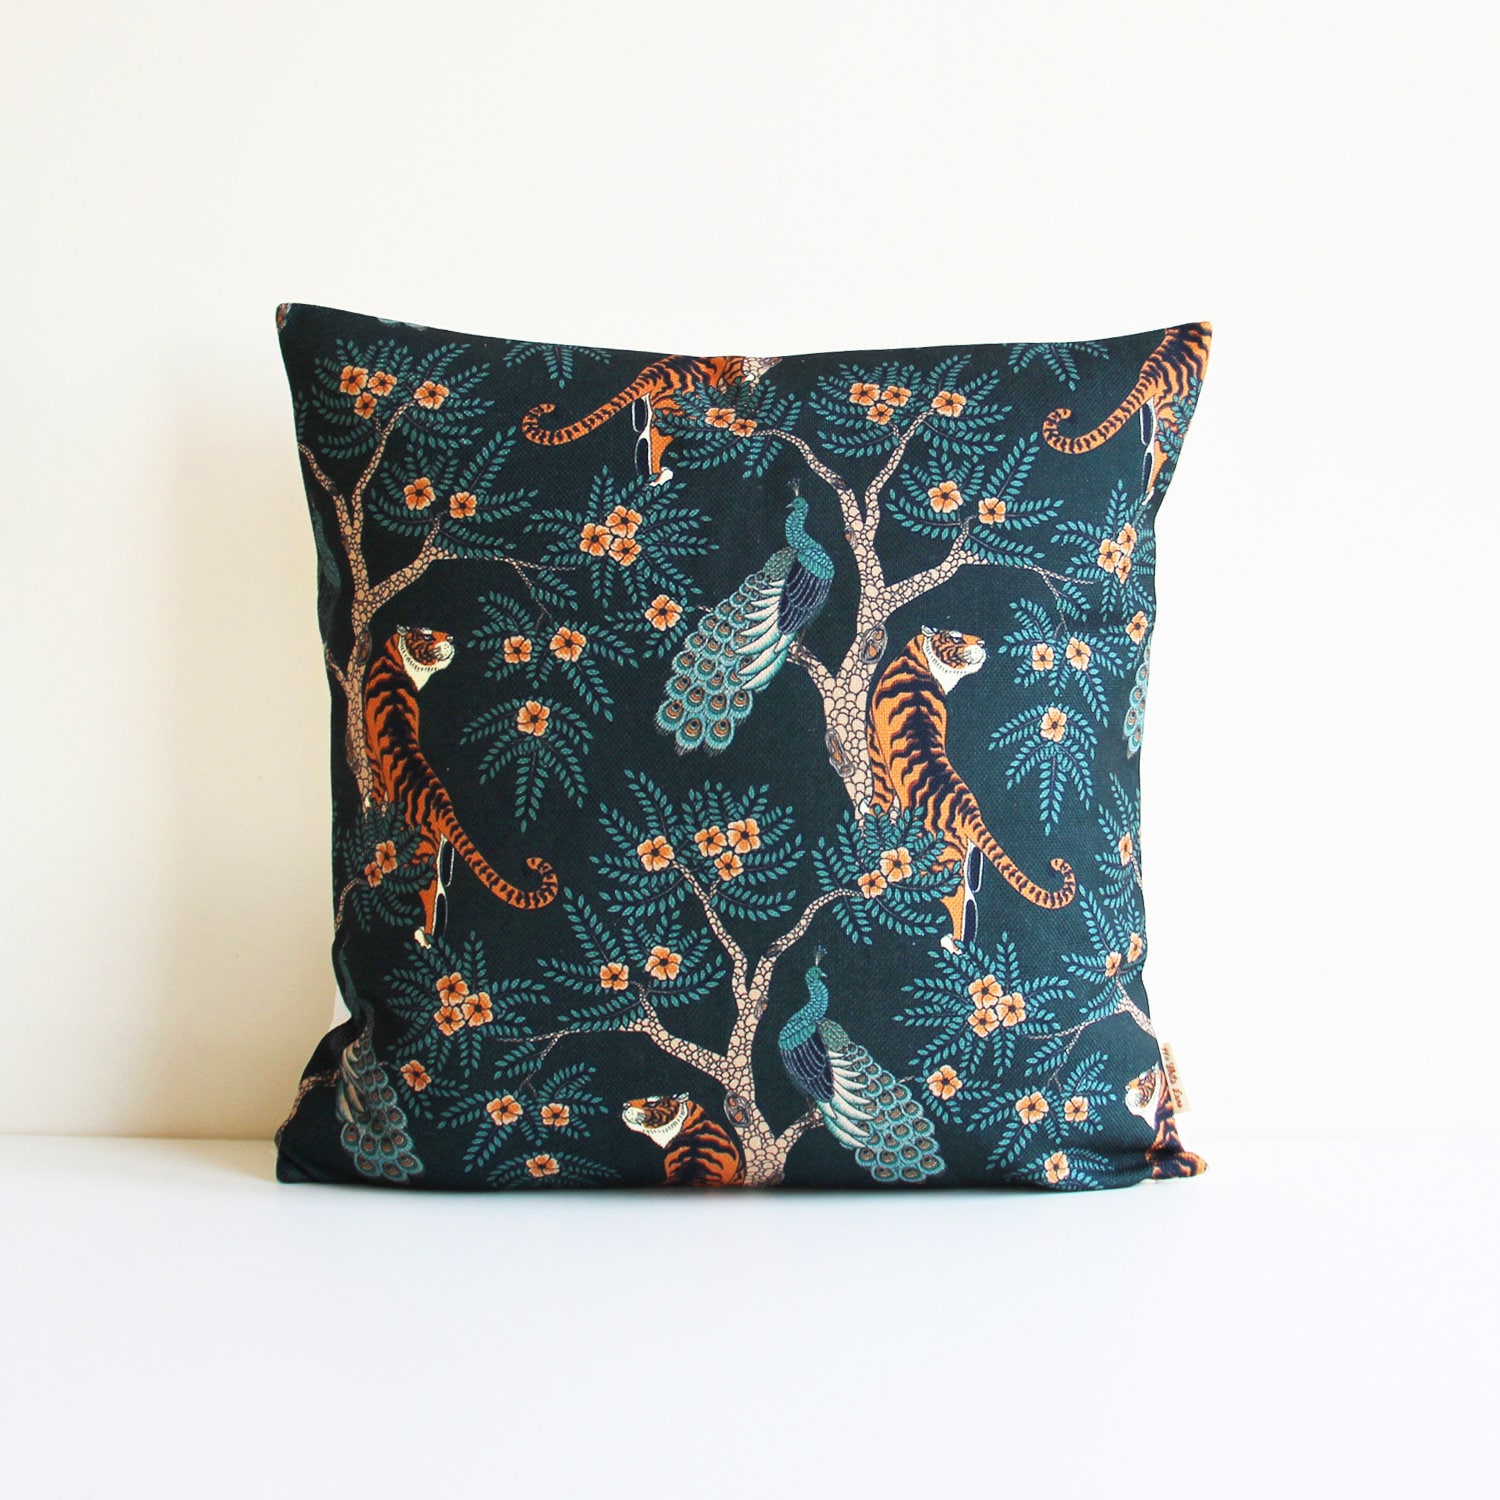 Rainforest Hand Painted Pillow Cover 16x16 Pillow Cover with Flowers Original Art Pillow Decorative Cushion